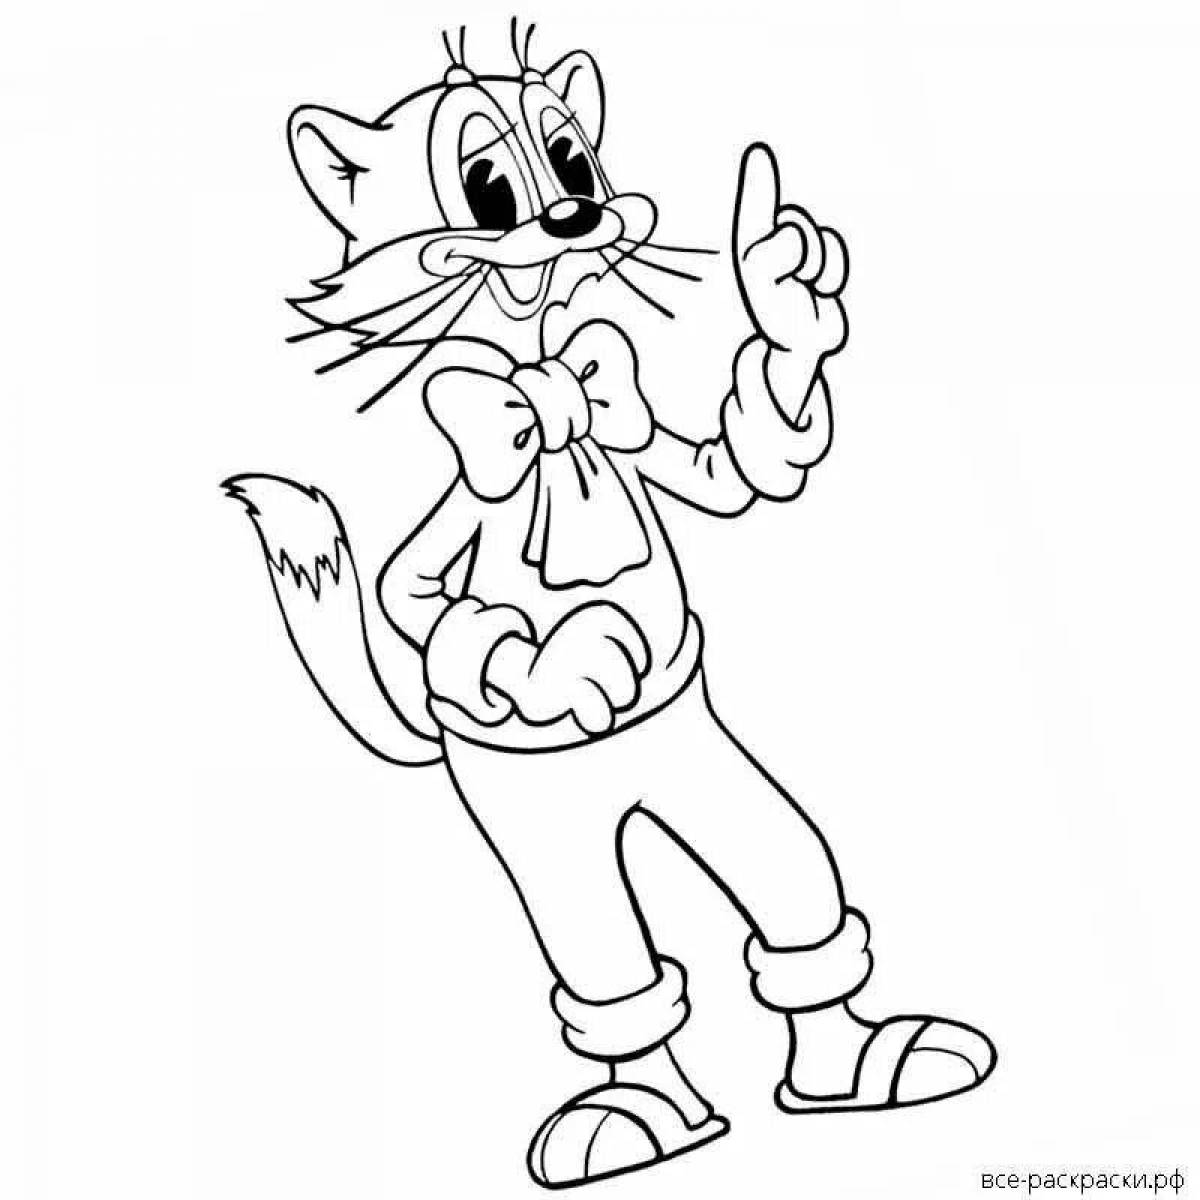 Leopold cat coloring page